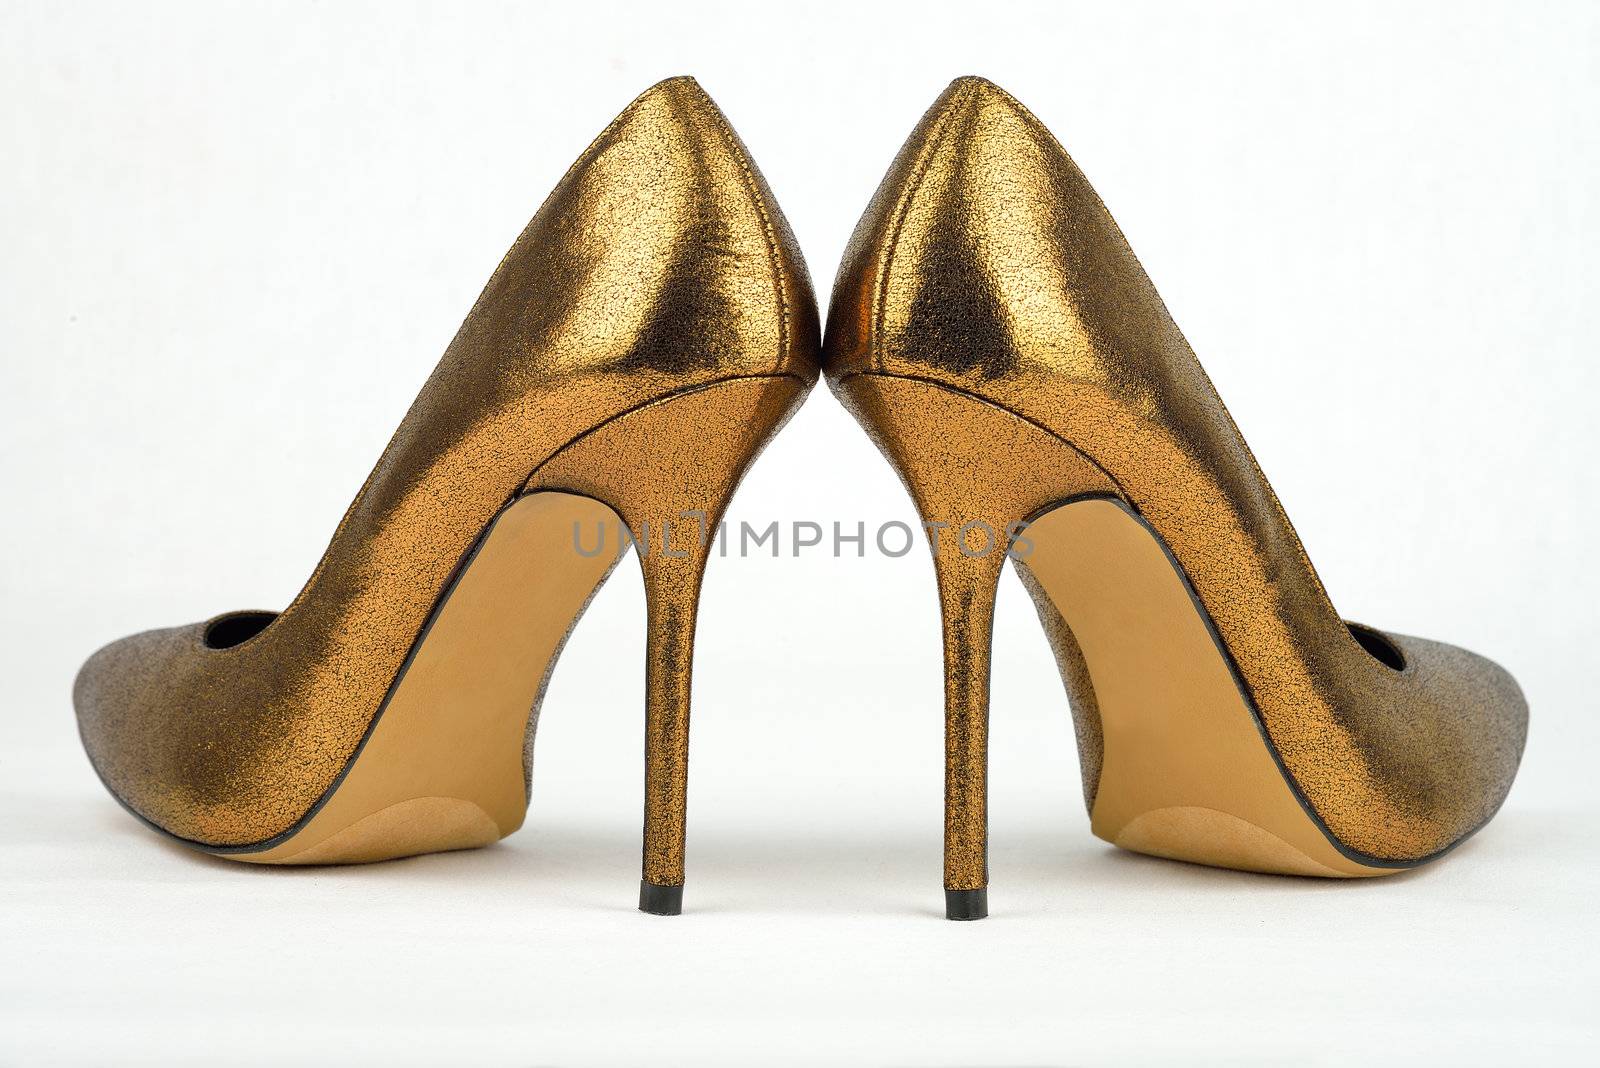 Pair of golden colored High Heel shoes against white background